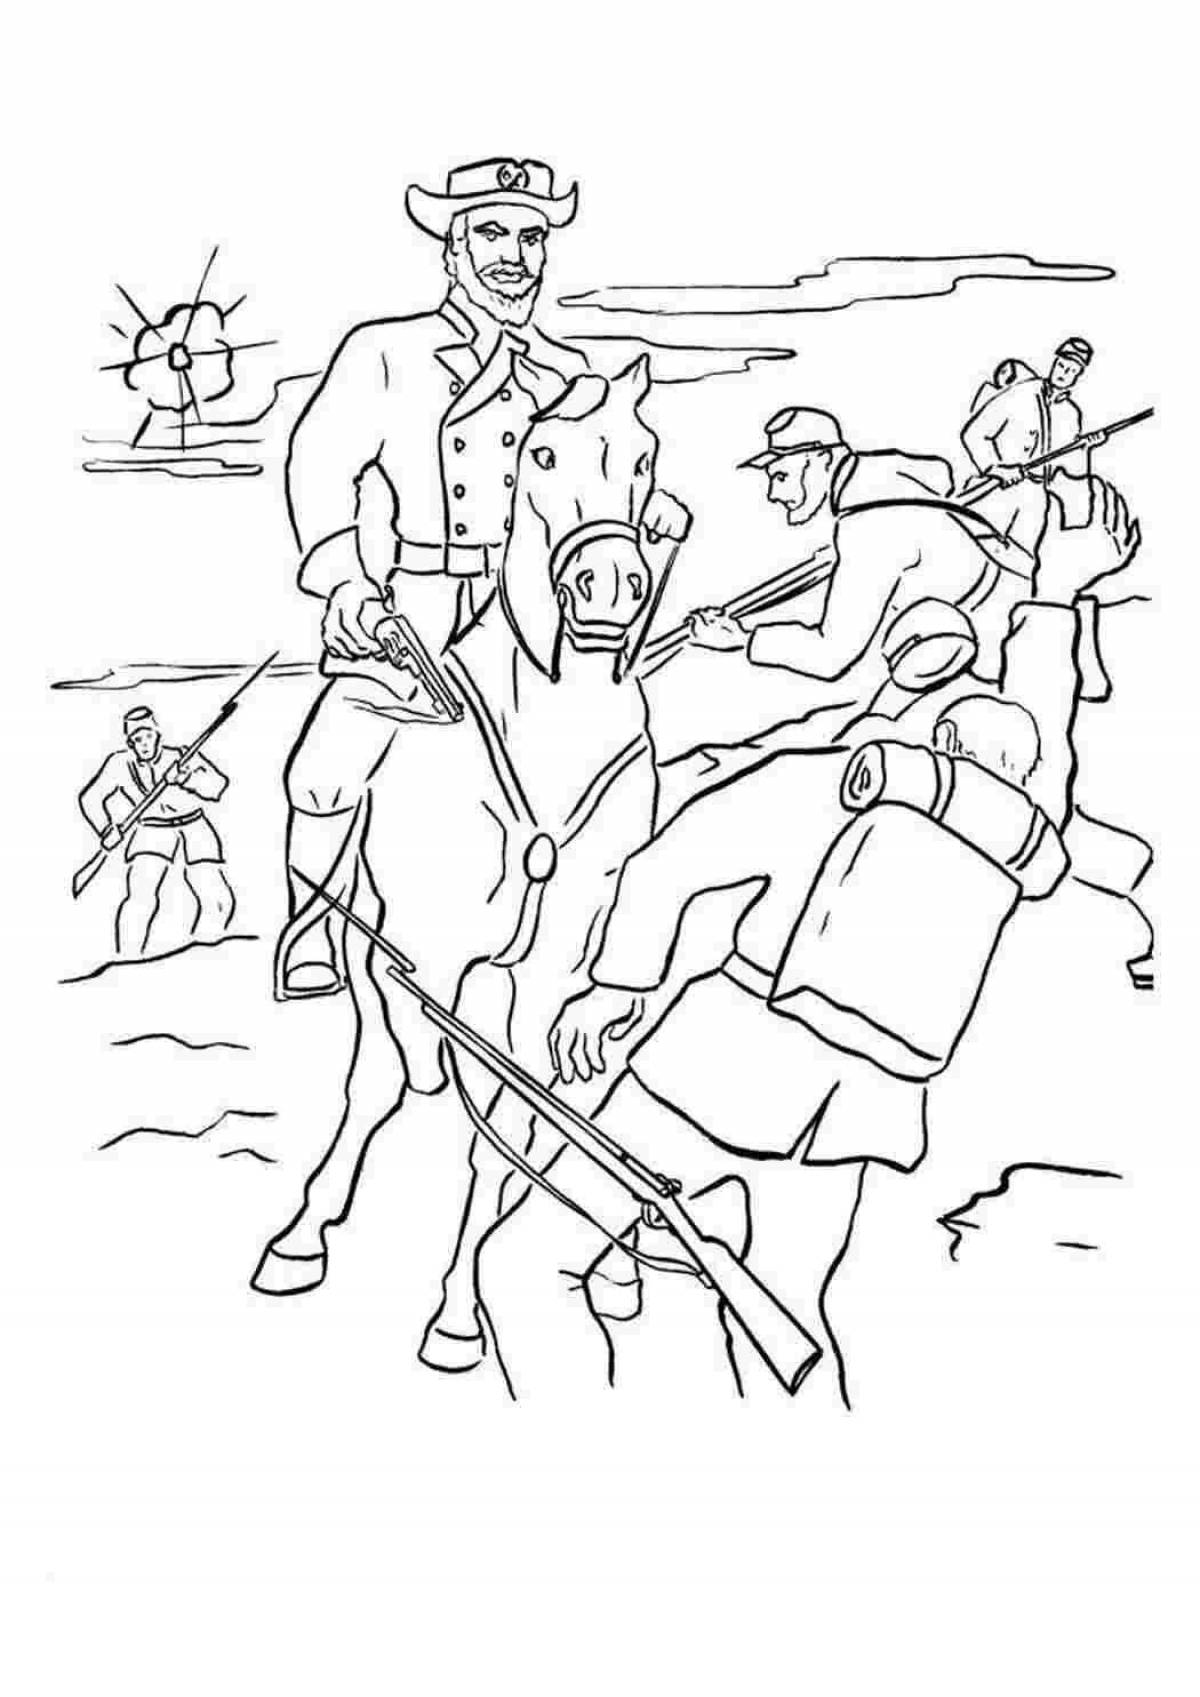 Coloring page charming afghanistan